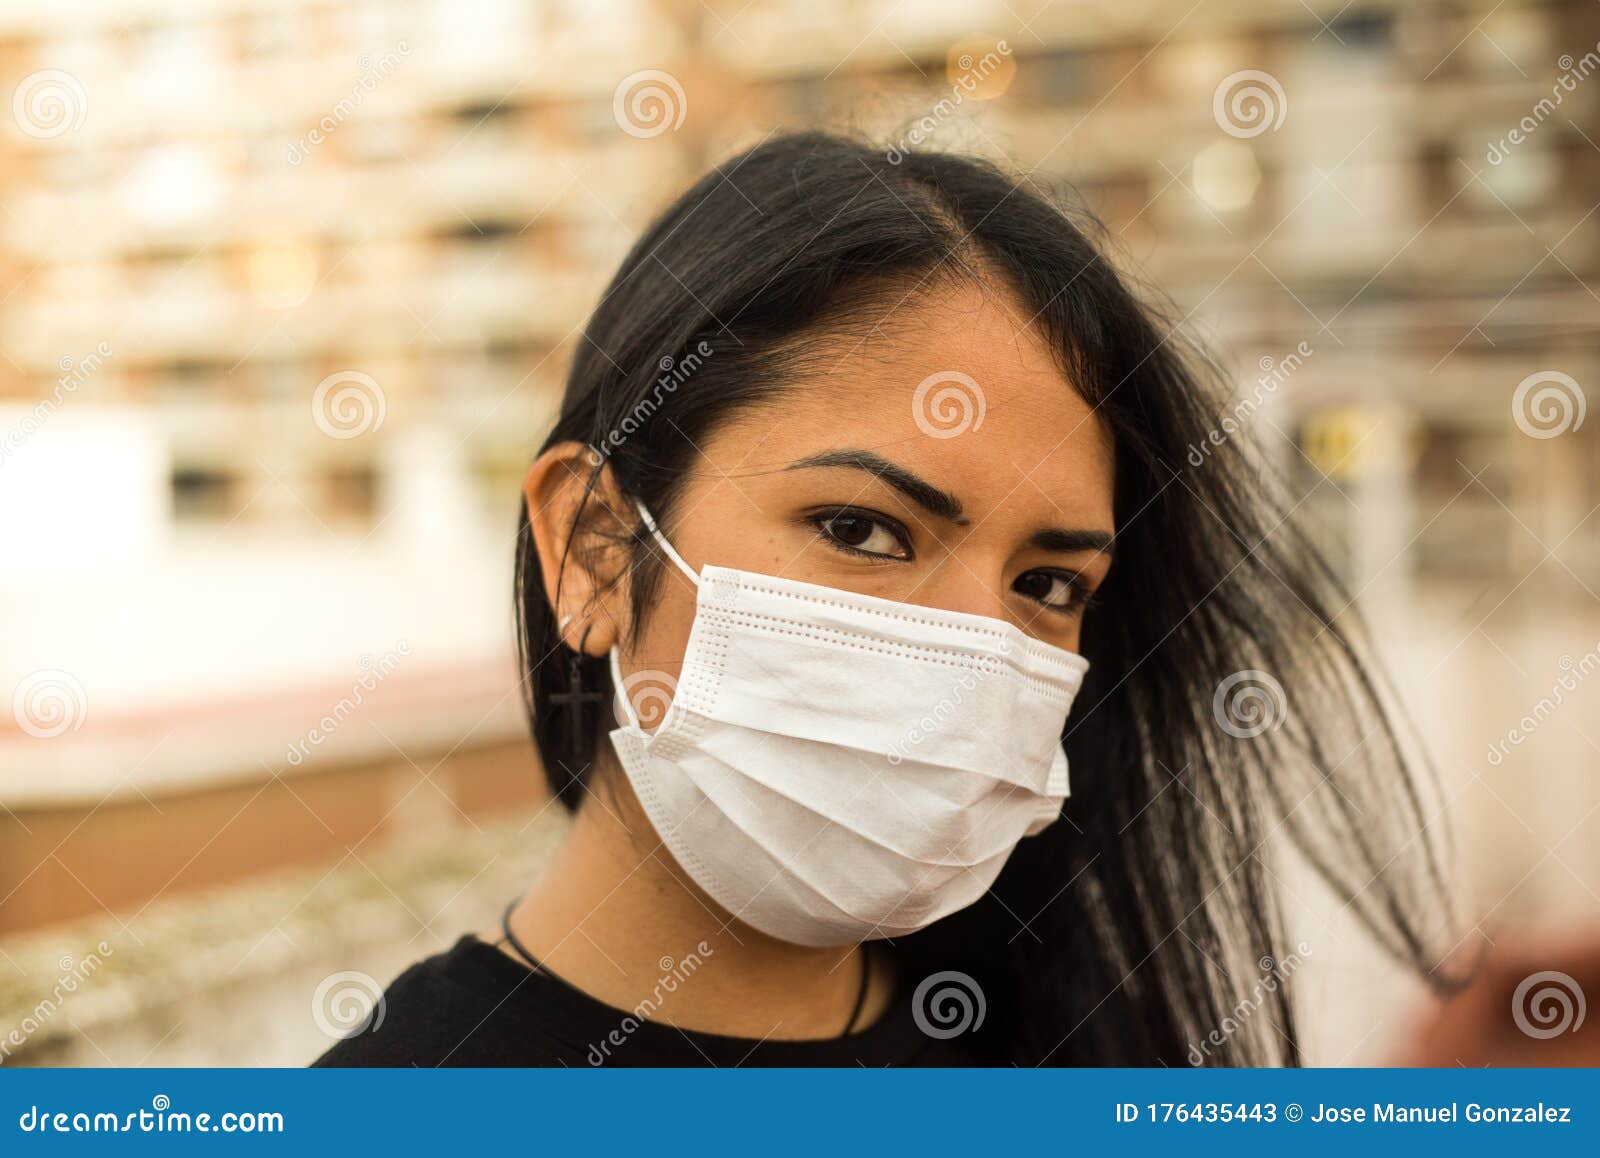 Latin Woman Looking at the Camera with a Prevention Mask and a Defiant ...